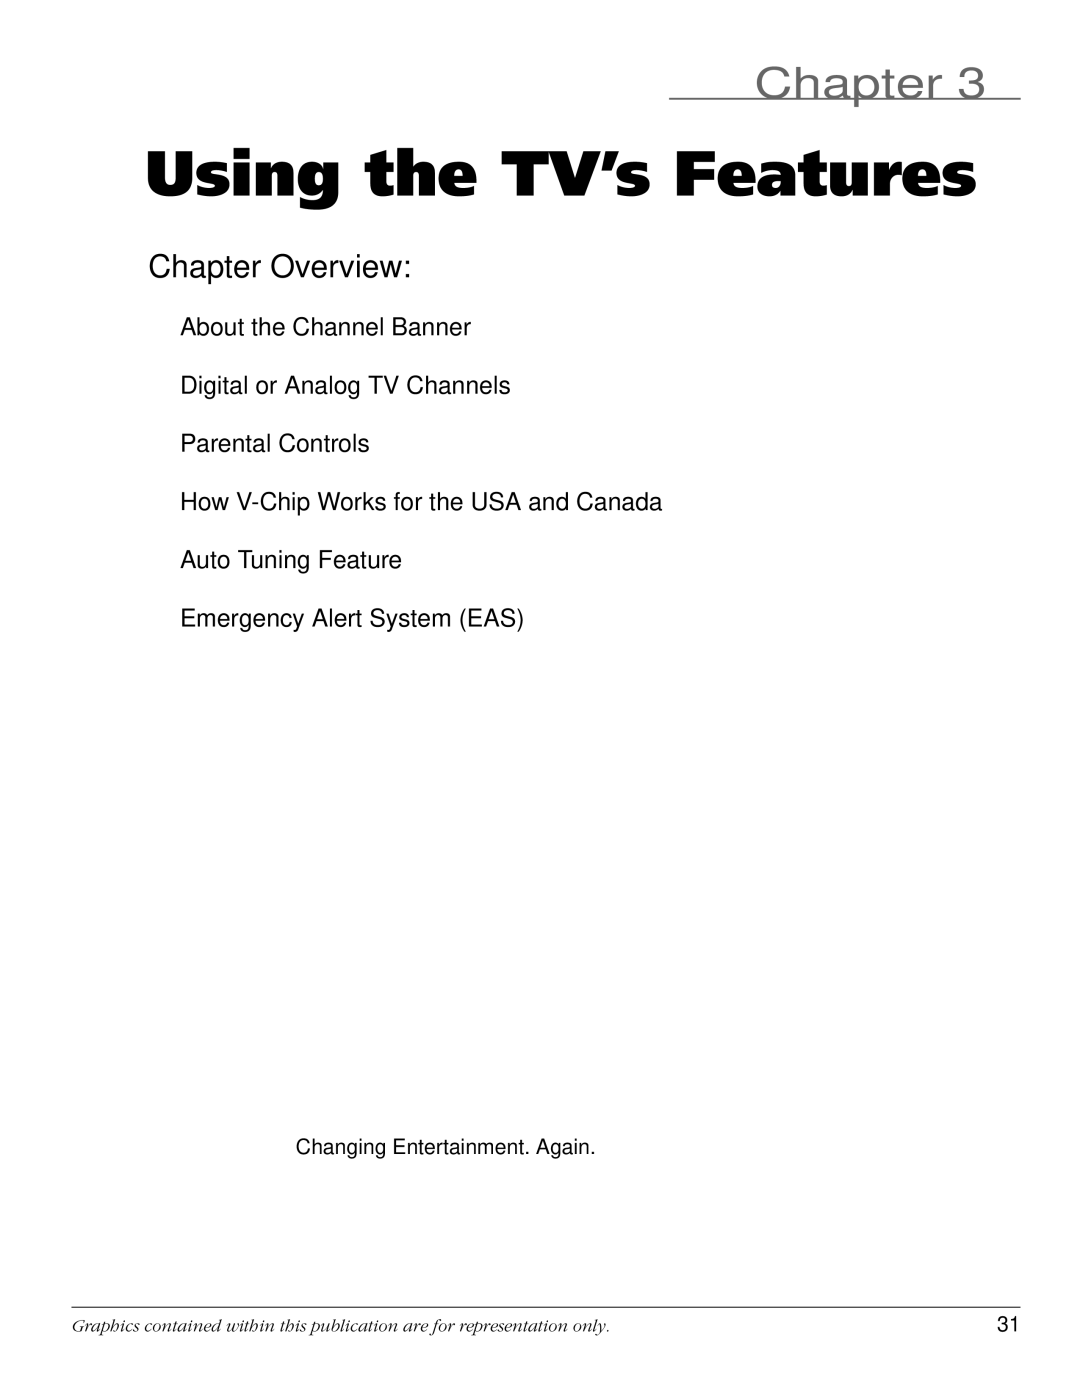 RCA HDTV manual Using the TV’s Features 